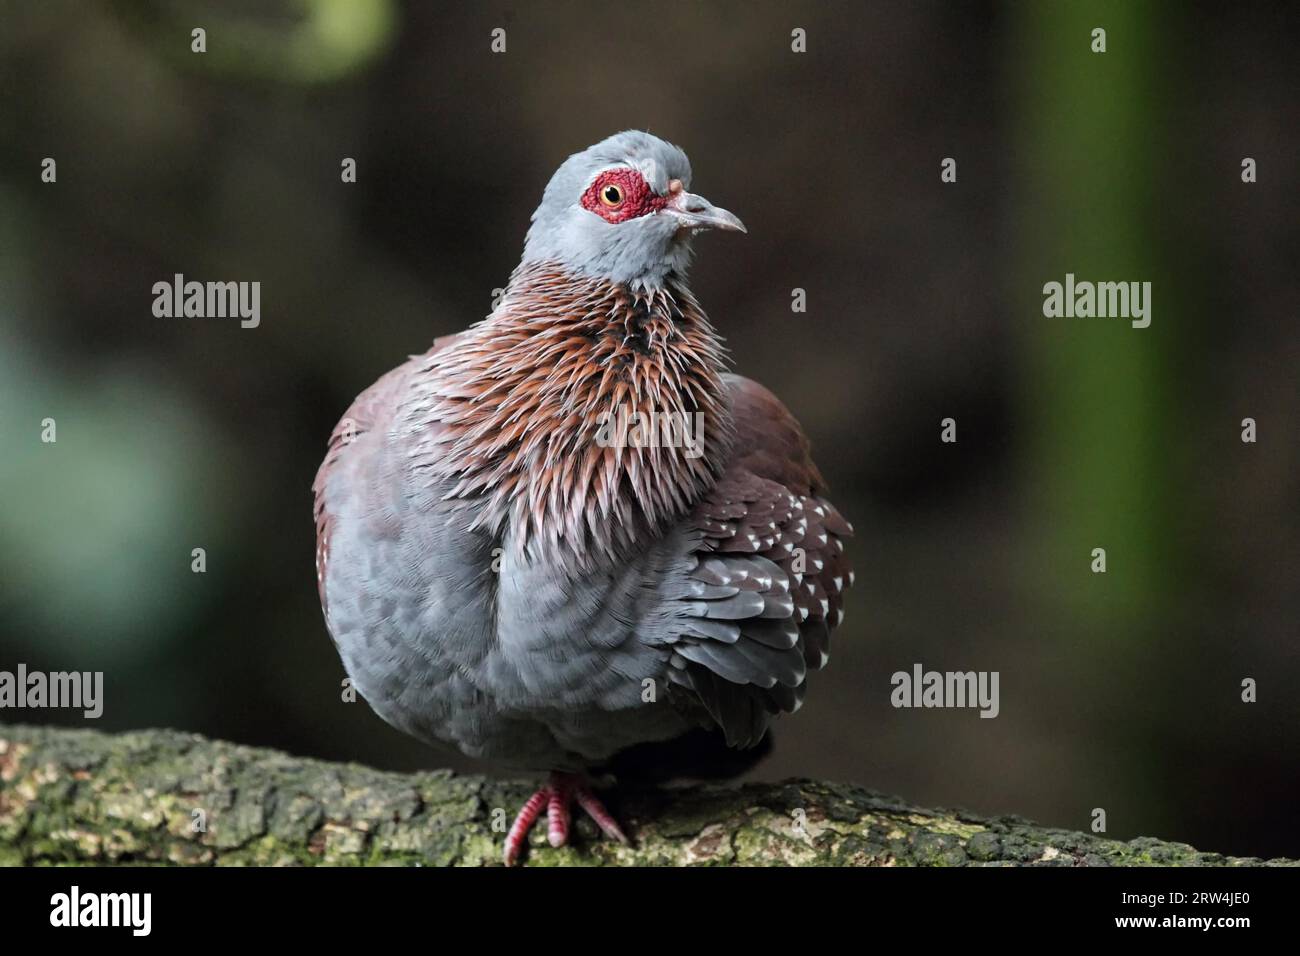 Speckled pigeon (Columba guinea) sitting on a branch Stock Photo